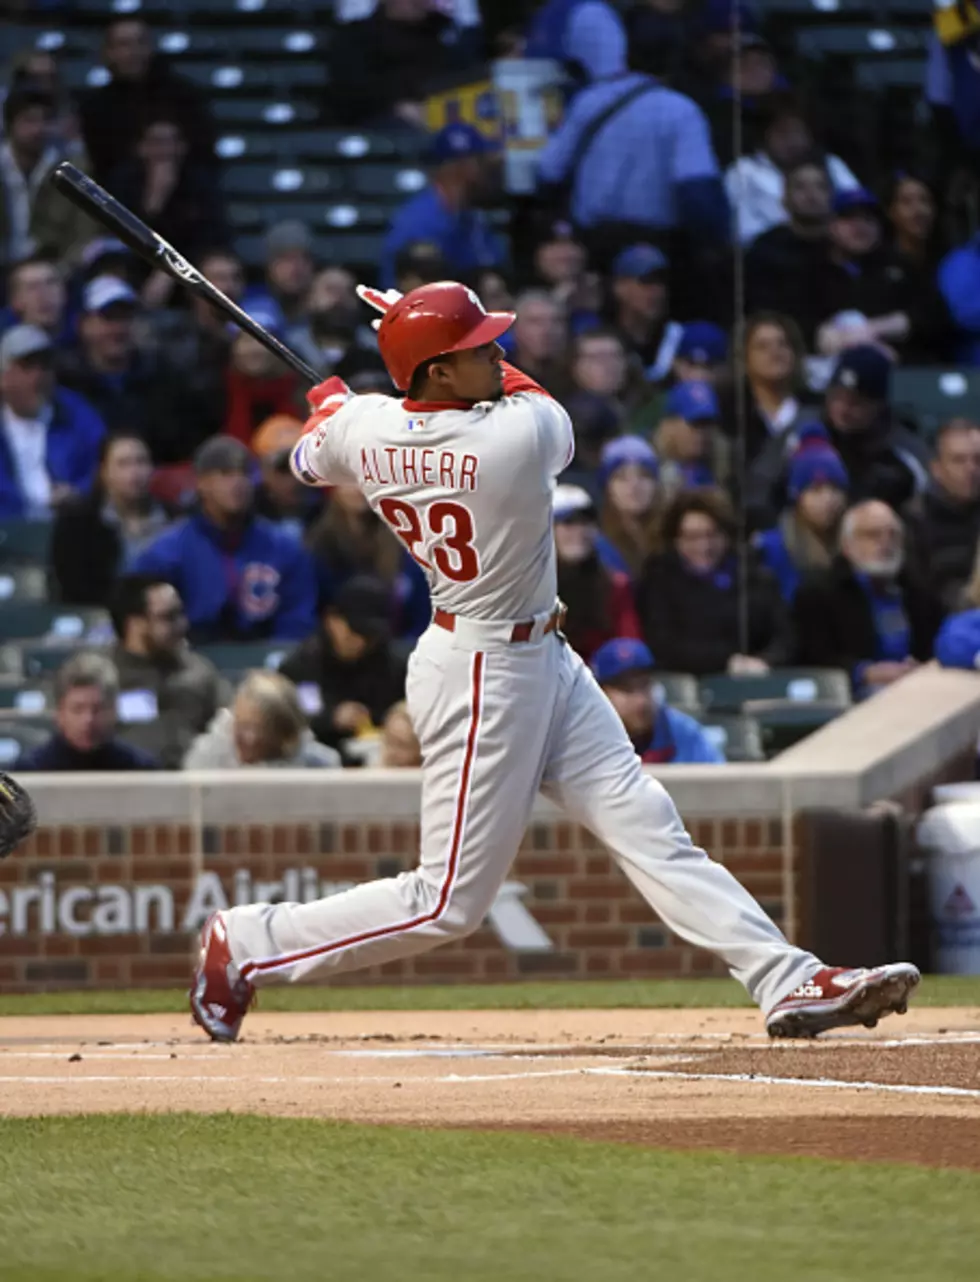 Has Altherr Earned A Starting Spot In The Phillies&#8217; Lineup?